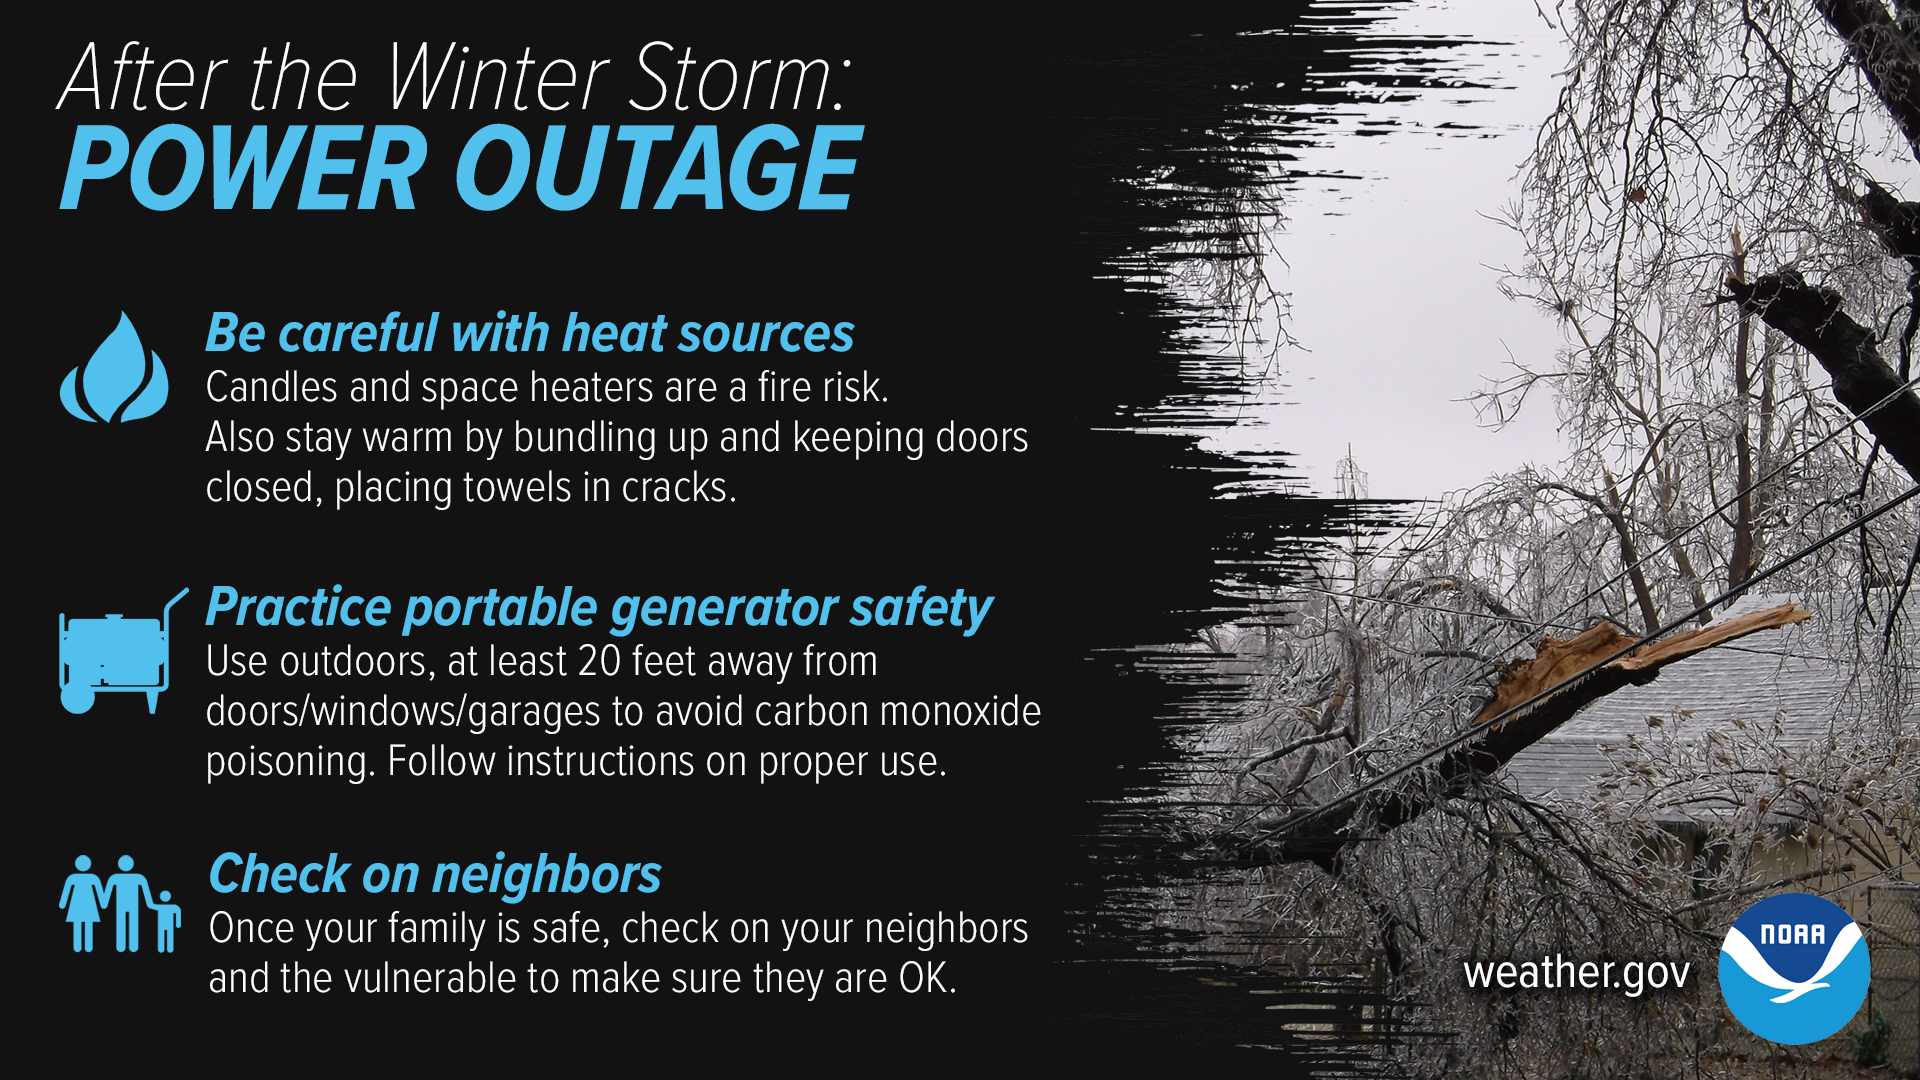 How to Stay Warm and Safe When the Power Goes Out